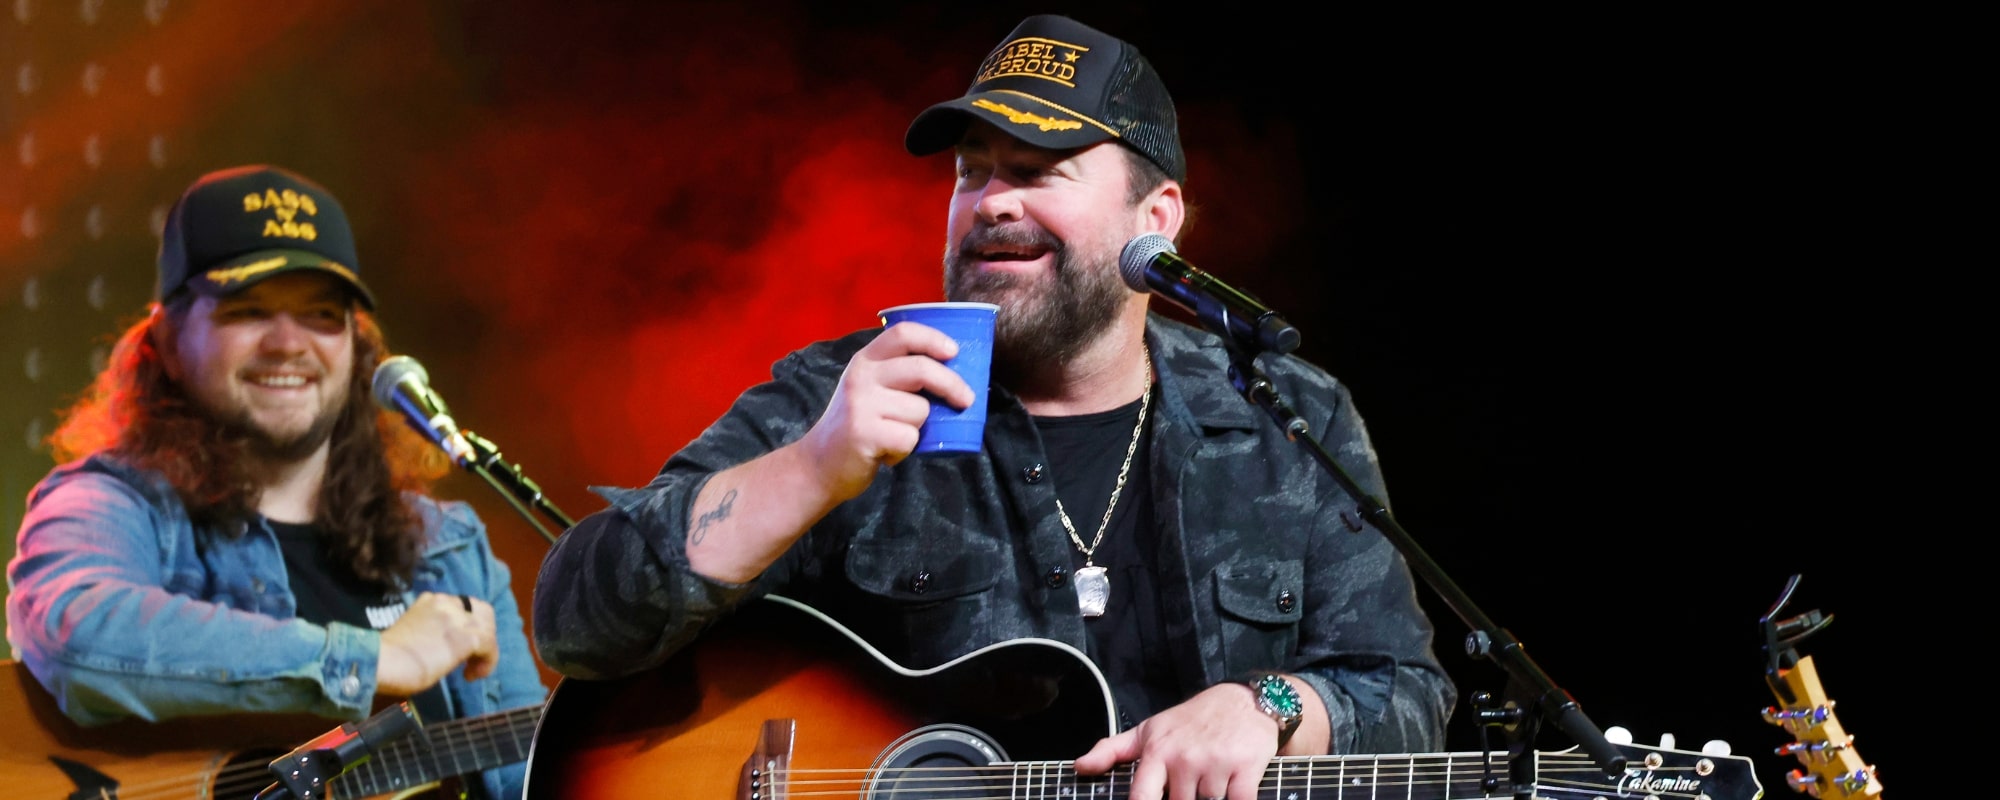 Lee Brice Calls Up His “Drinkin’ Buddies” Hailey Whitters and Nate Smith for New Single